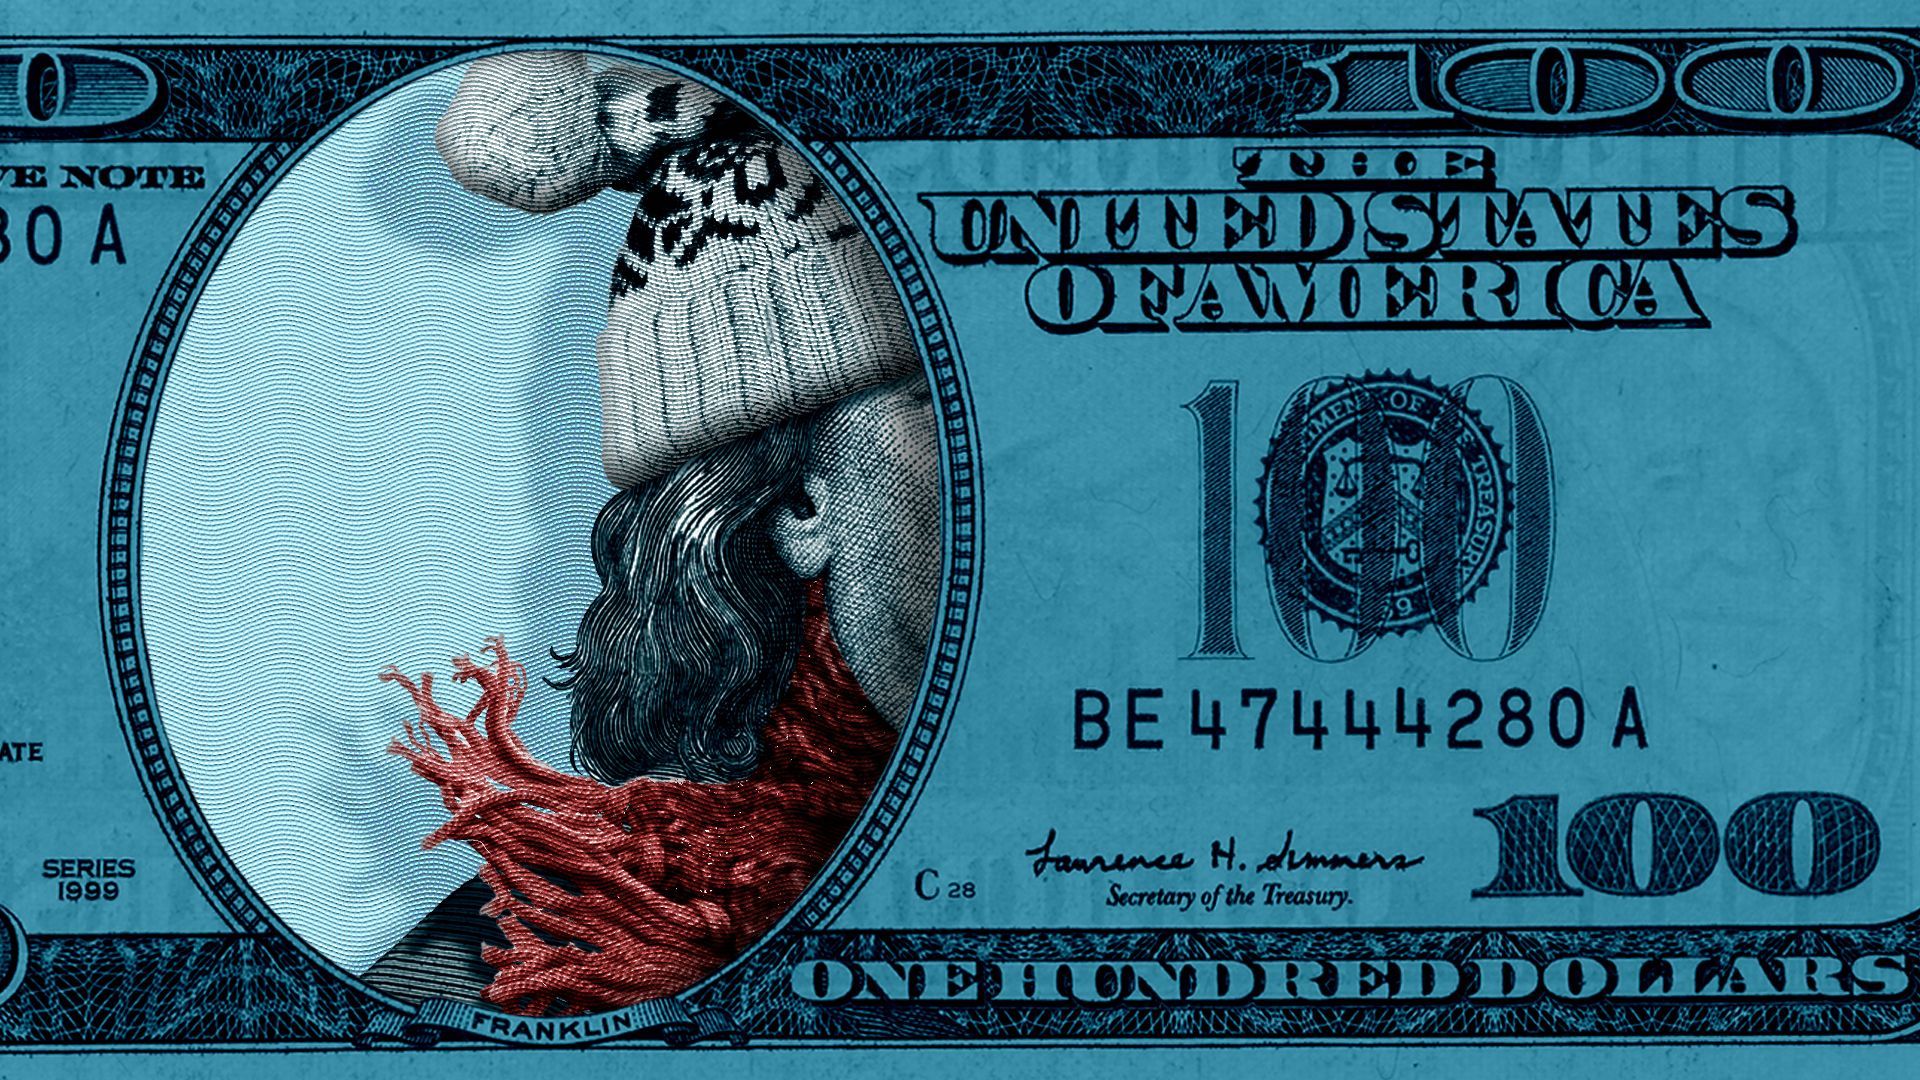 Illustration of Benjamin Franklin wearing cold weather gear and exiting the frame of the one hundred dollar bill.